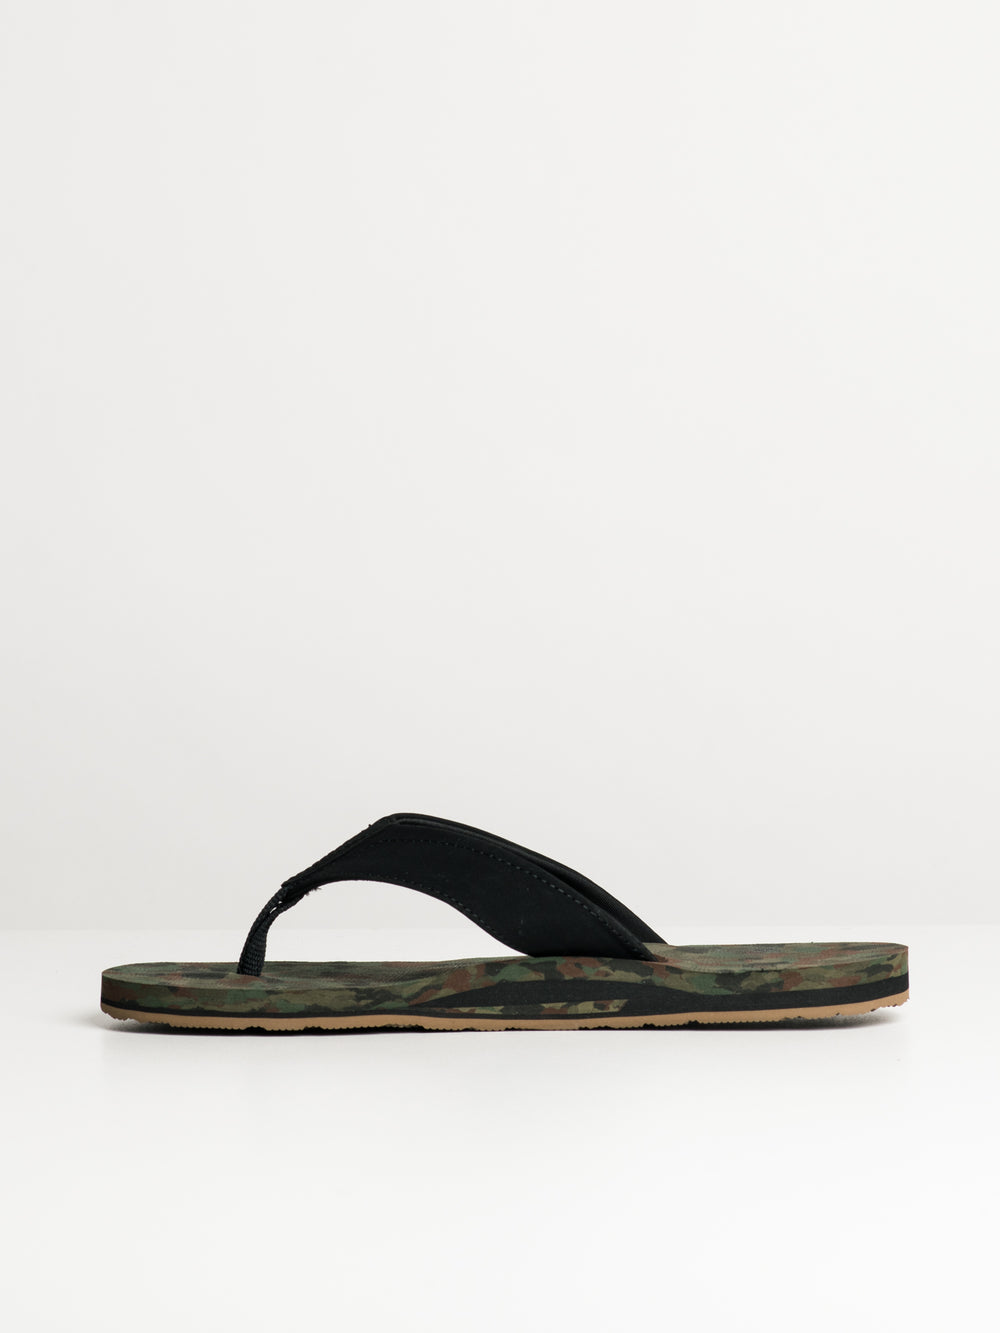 MENS VOLCOM VICTOR SANDALS - CLEARANCE